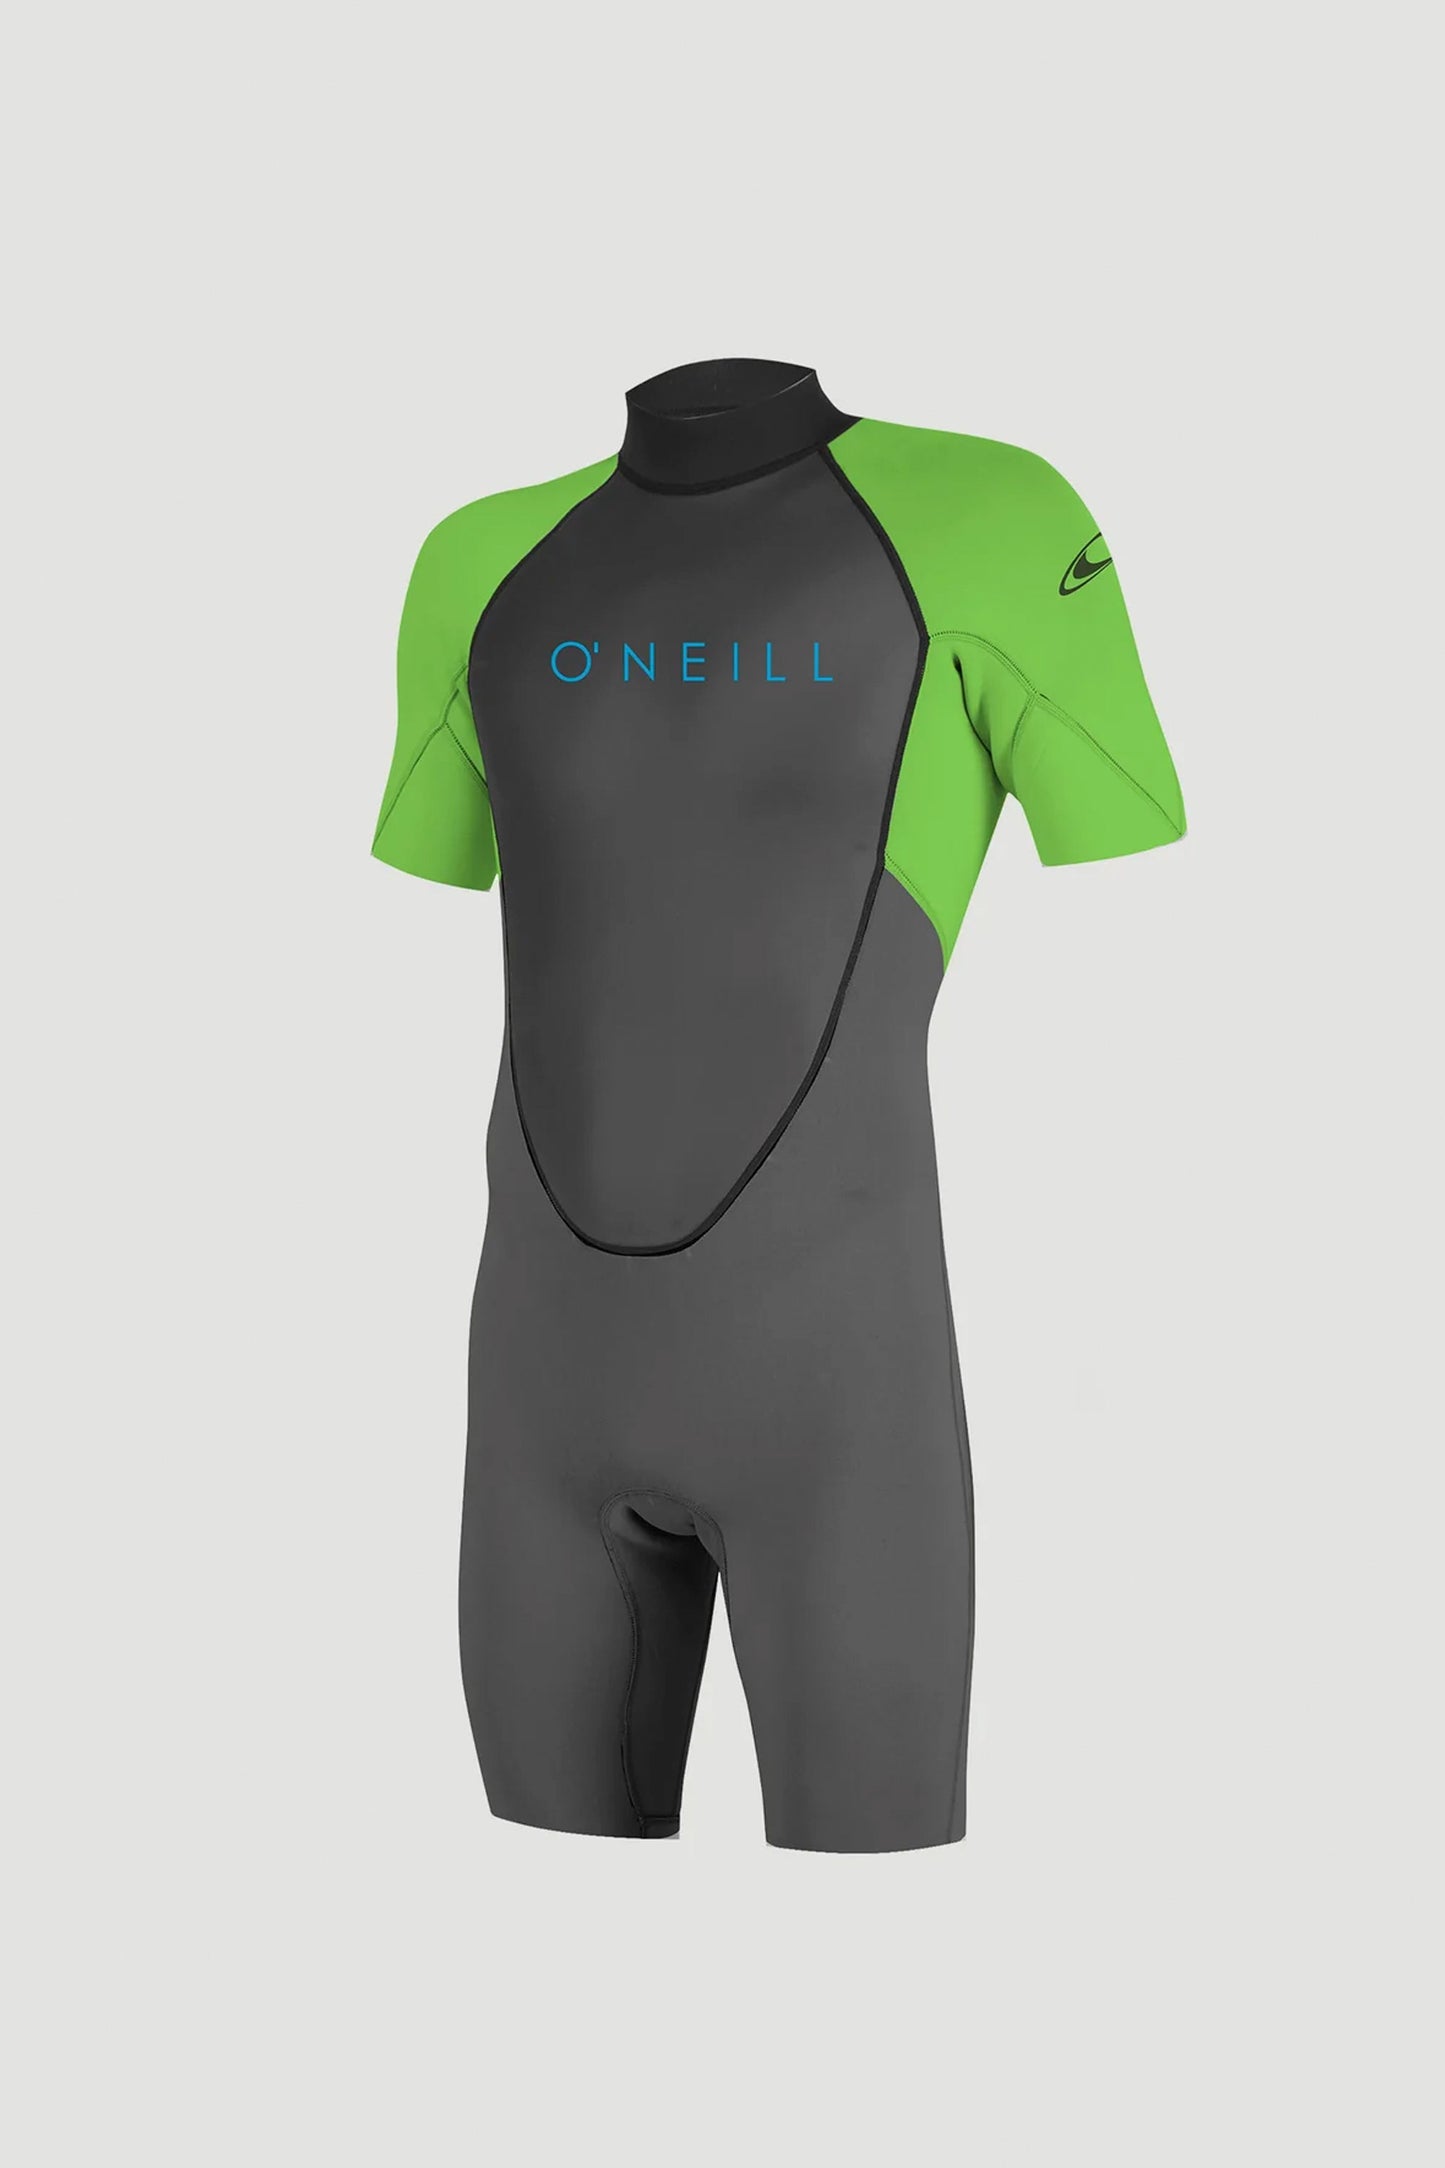 Pukas-Surf-Shop-Wetsuits-kids-reactor-2-2mm-back-ip-shortsleeve-spring-wetsuit-youth-graph-dayglo